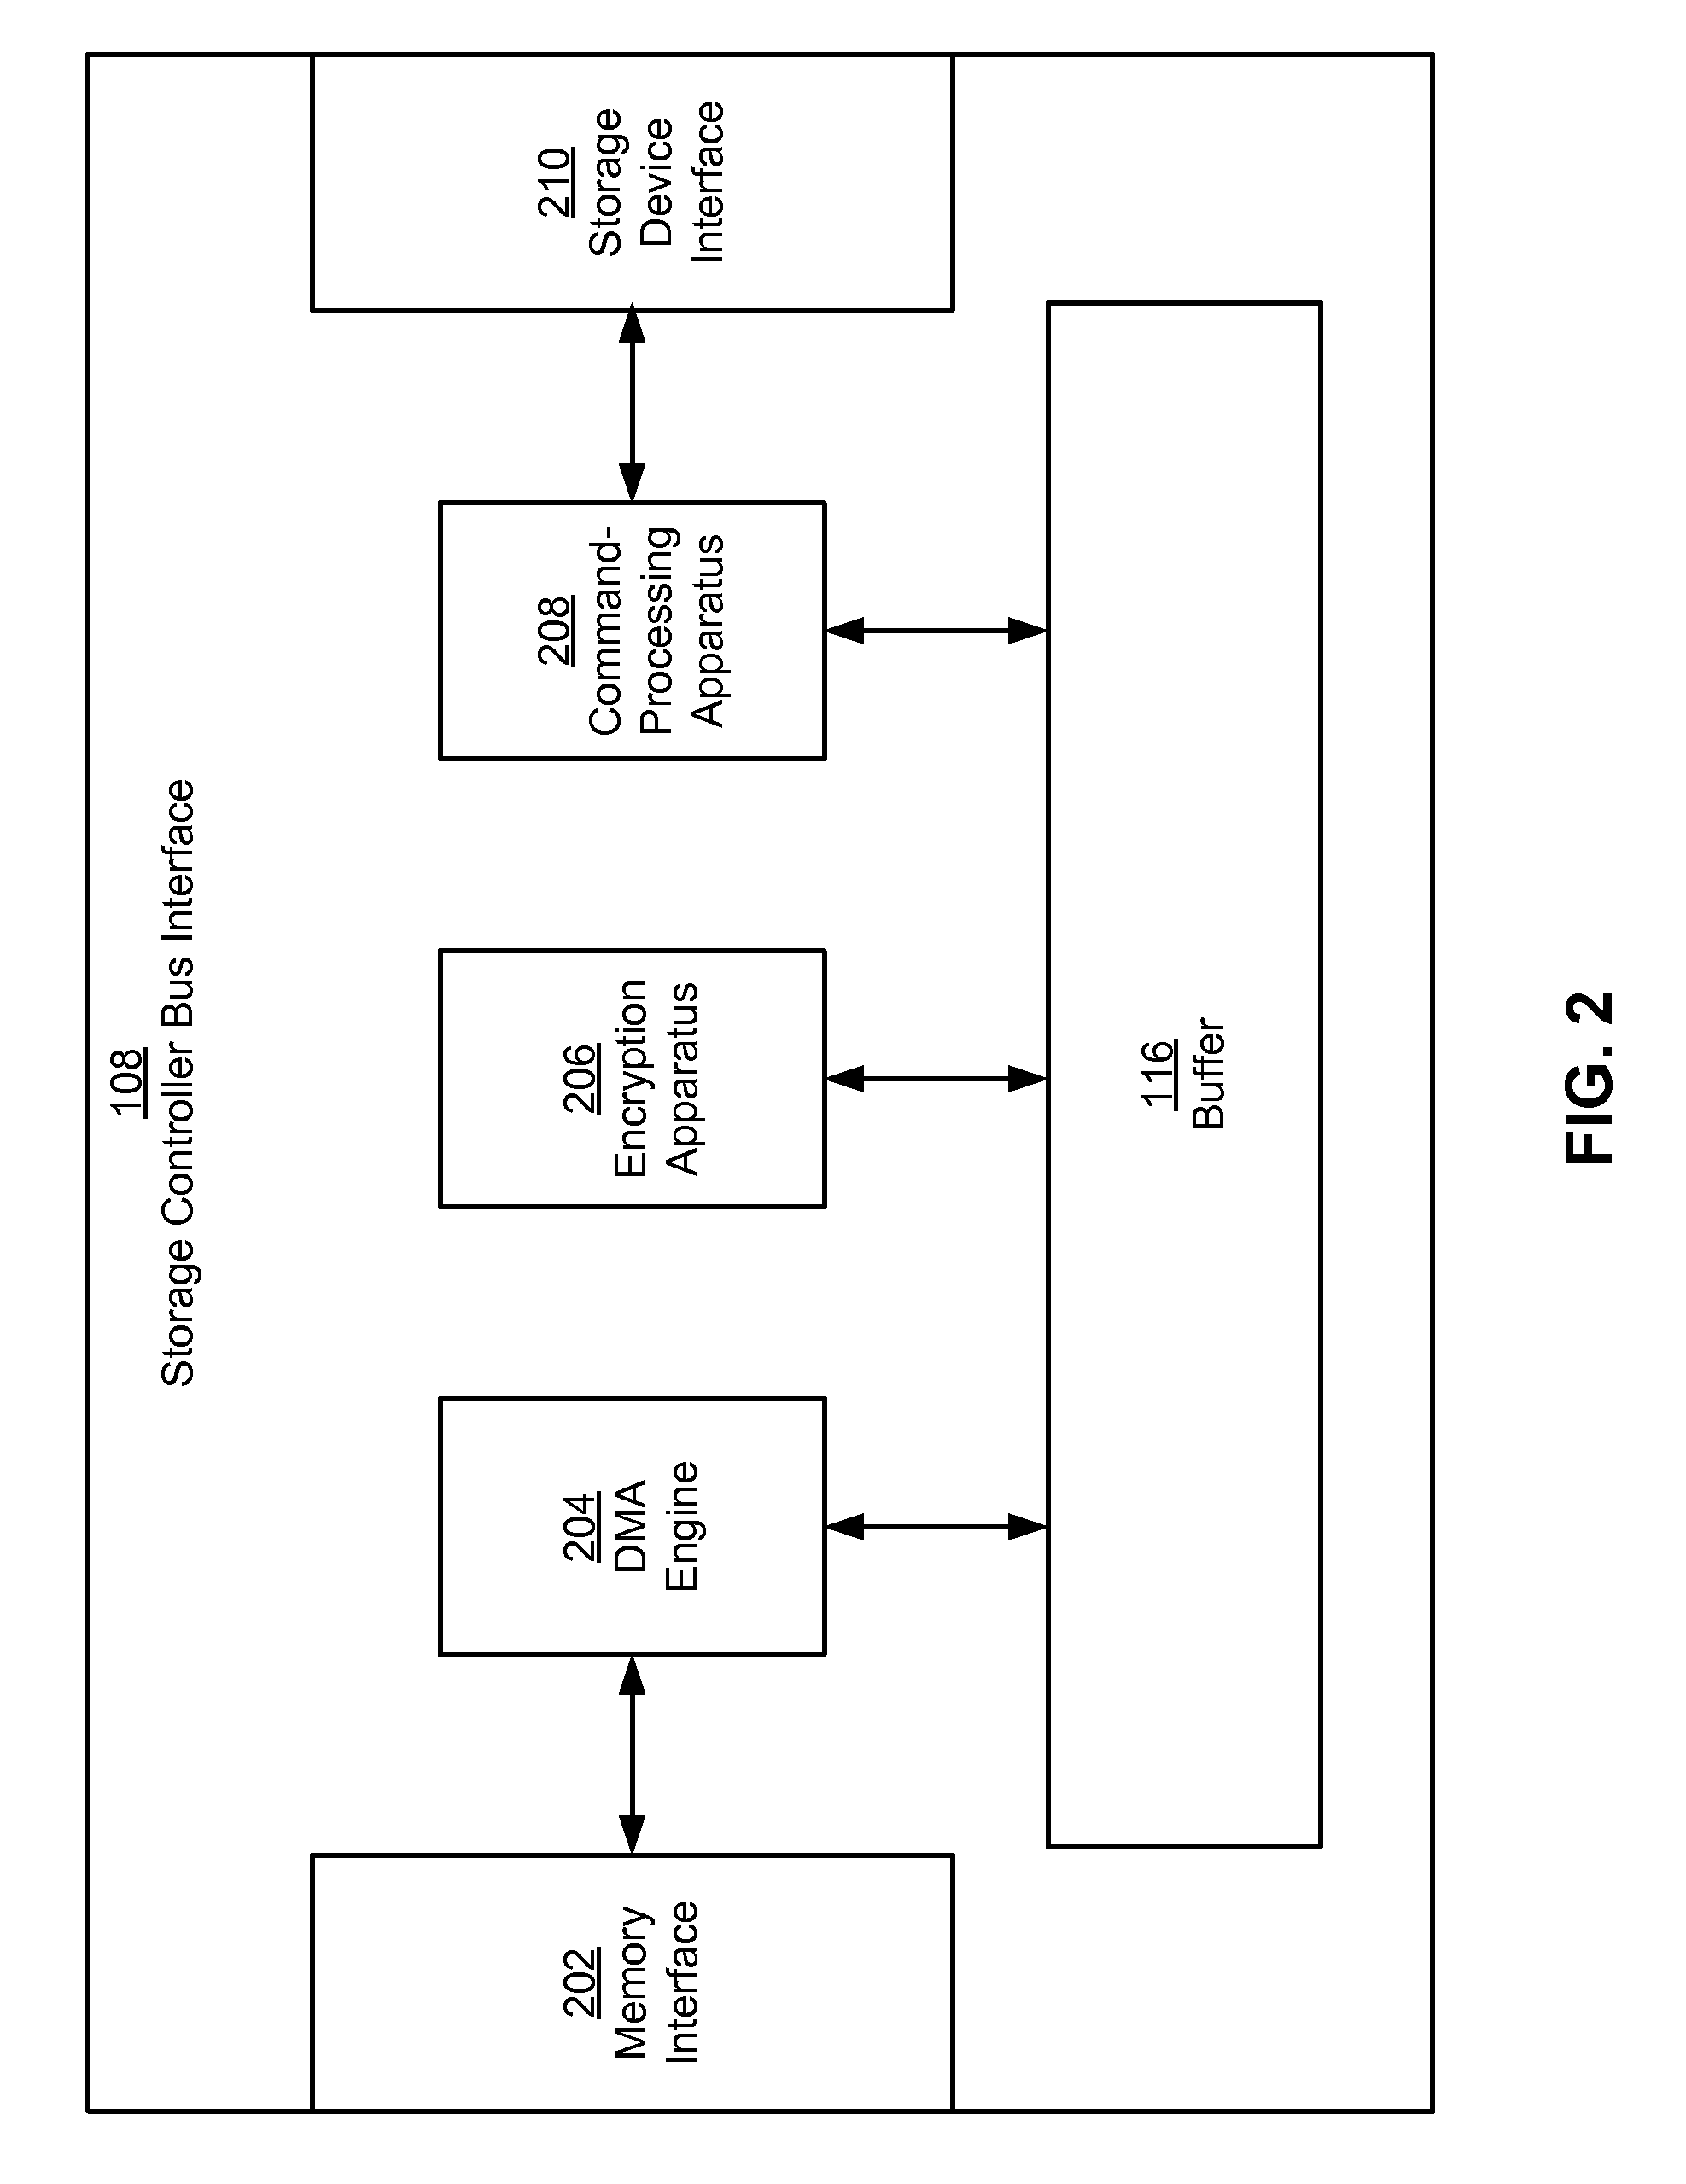 Using storage controller bus interfaces to secure data transfer between storage devices and hosts